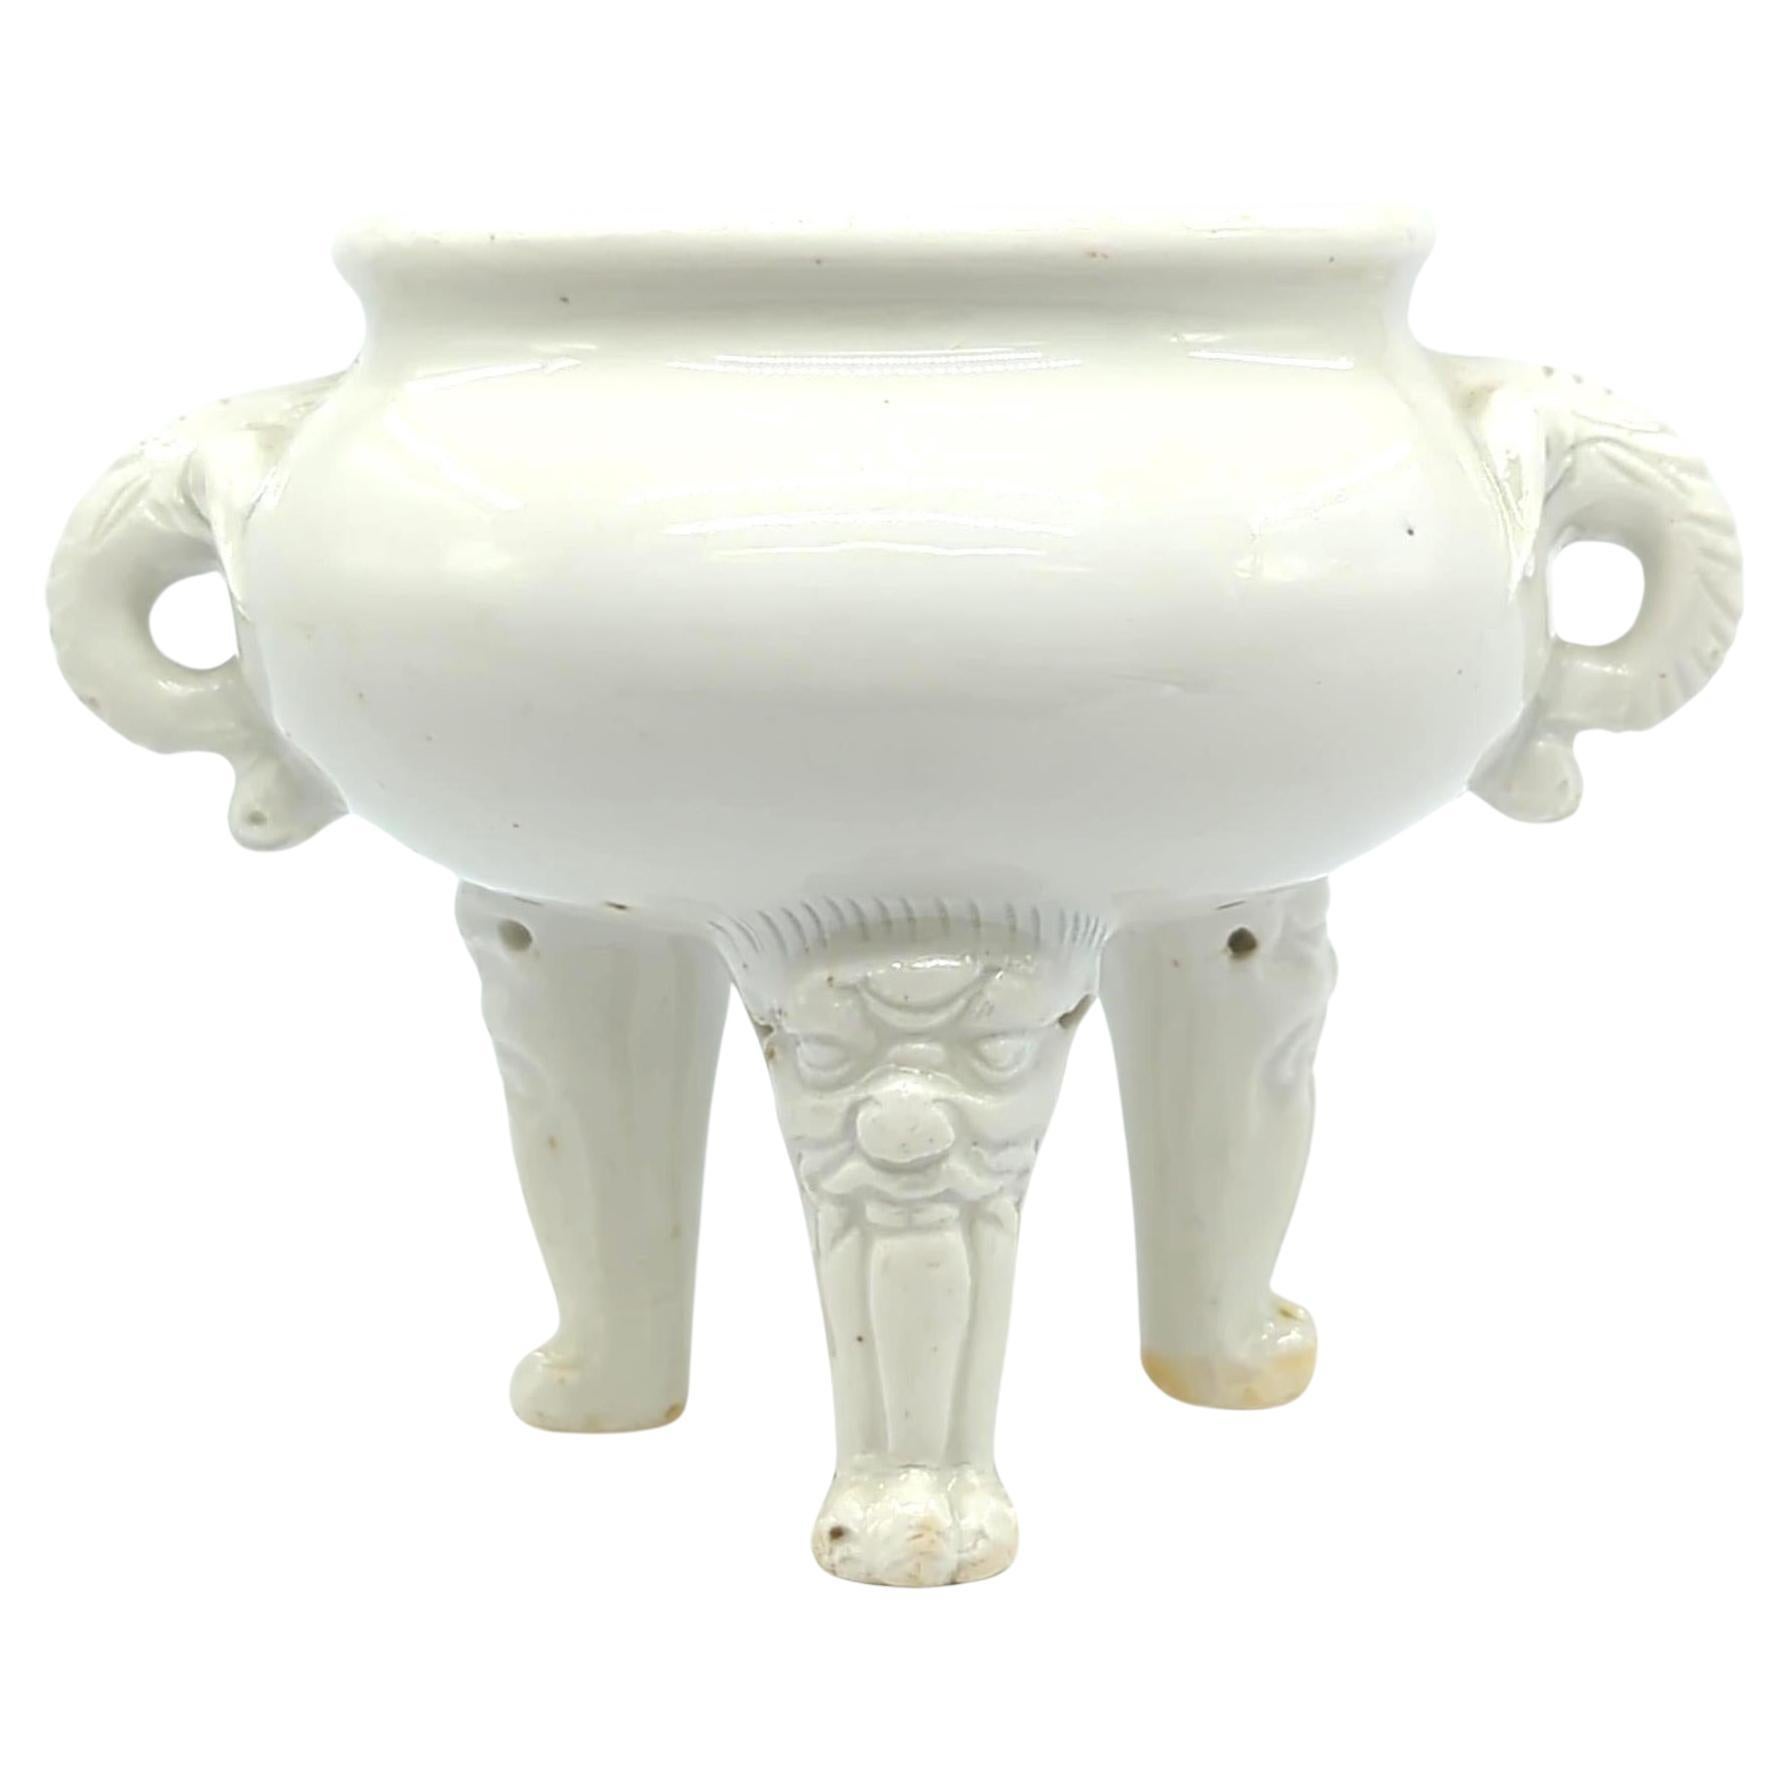 This 18th-century Kangxi period blanc de chine Chinese porcelain tripod censer is an exemplar of refined craftsmanship and intricate detailing, hallmarks of the Kangxi era. The censer is crafted in the blanc de chine technique, known for its milky